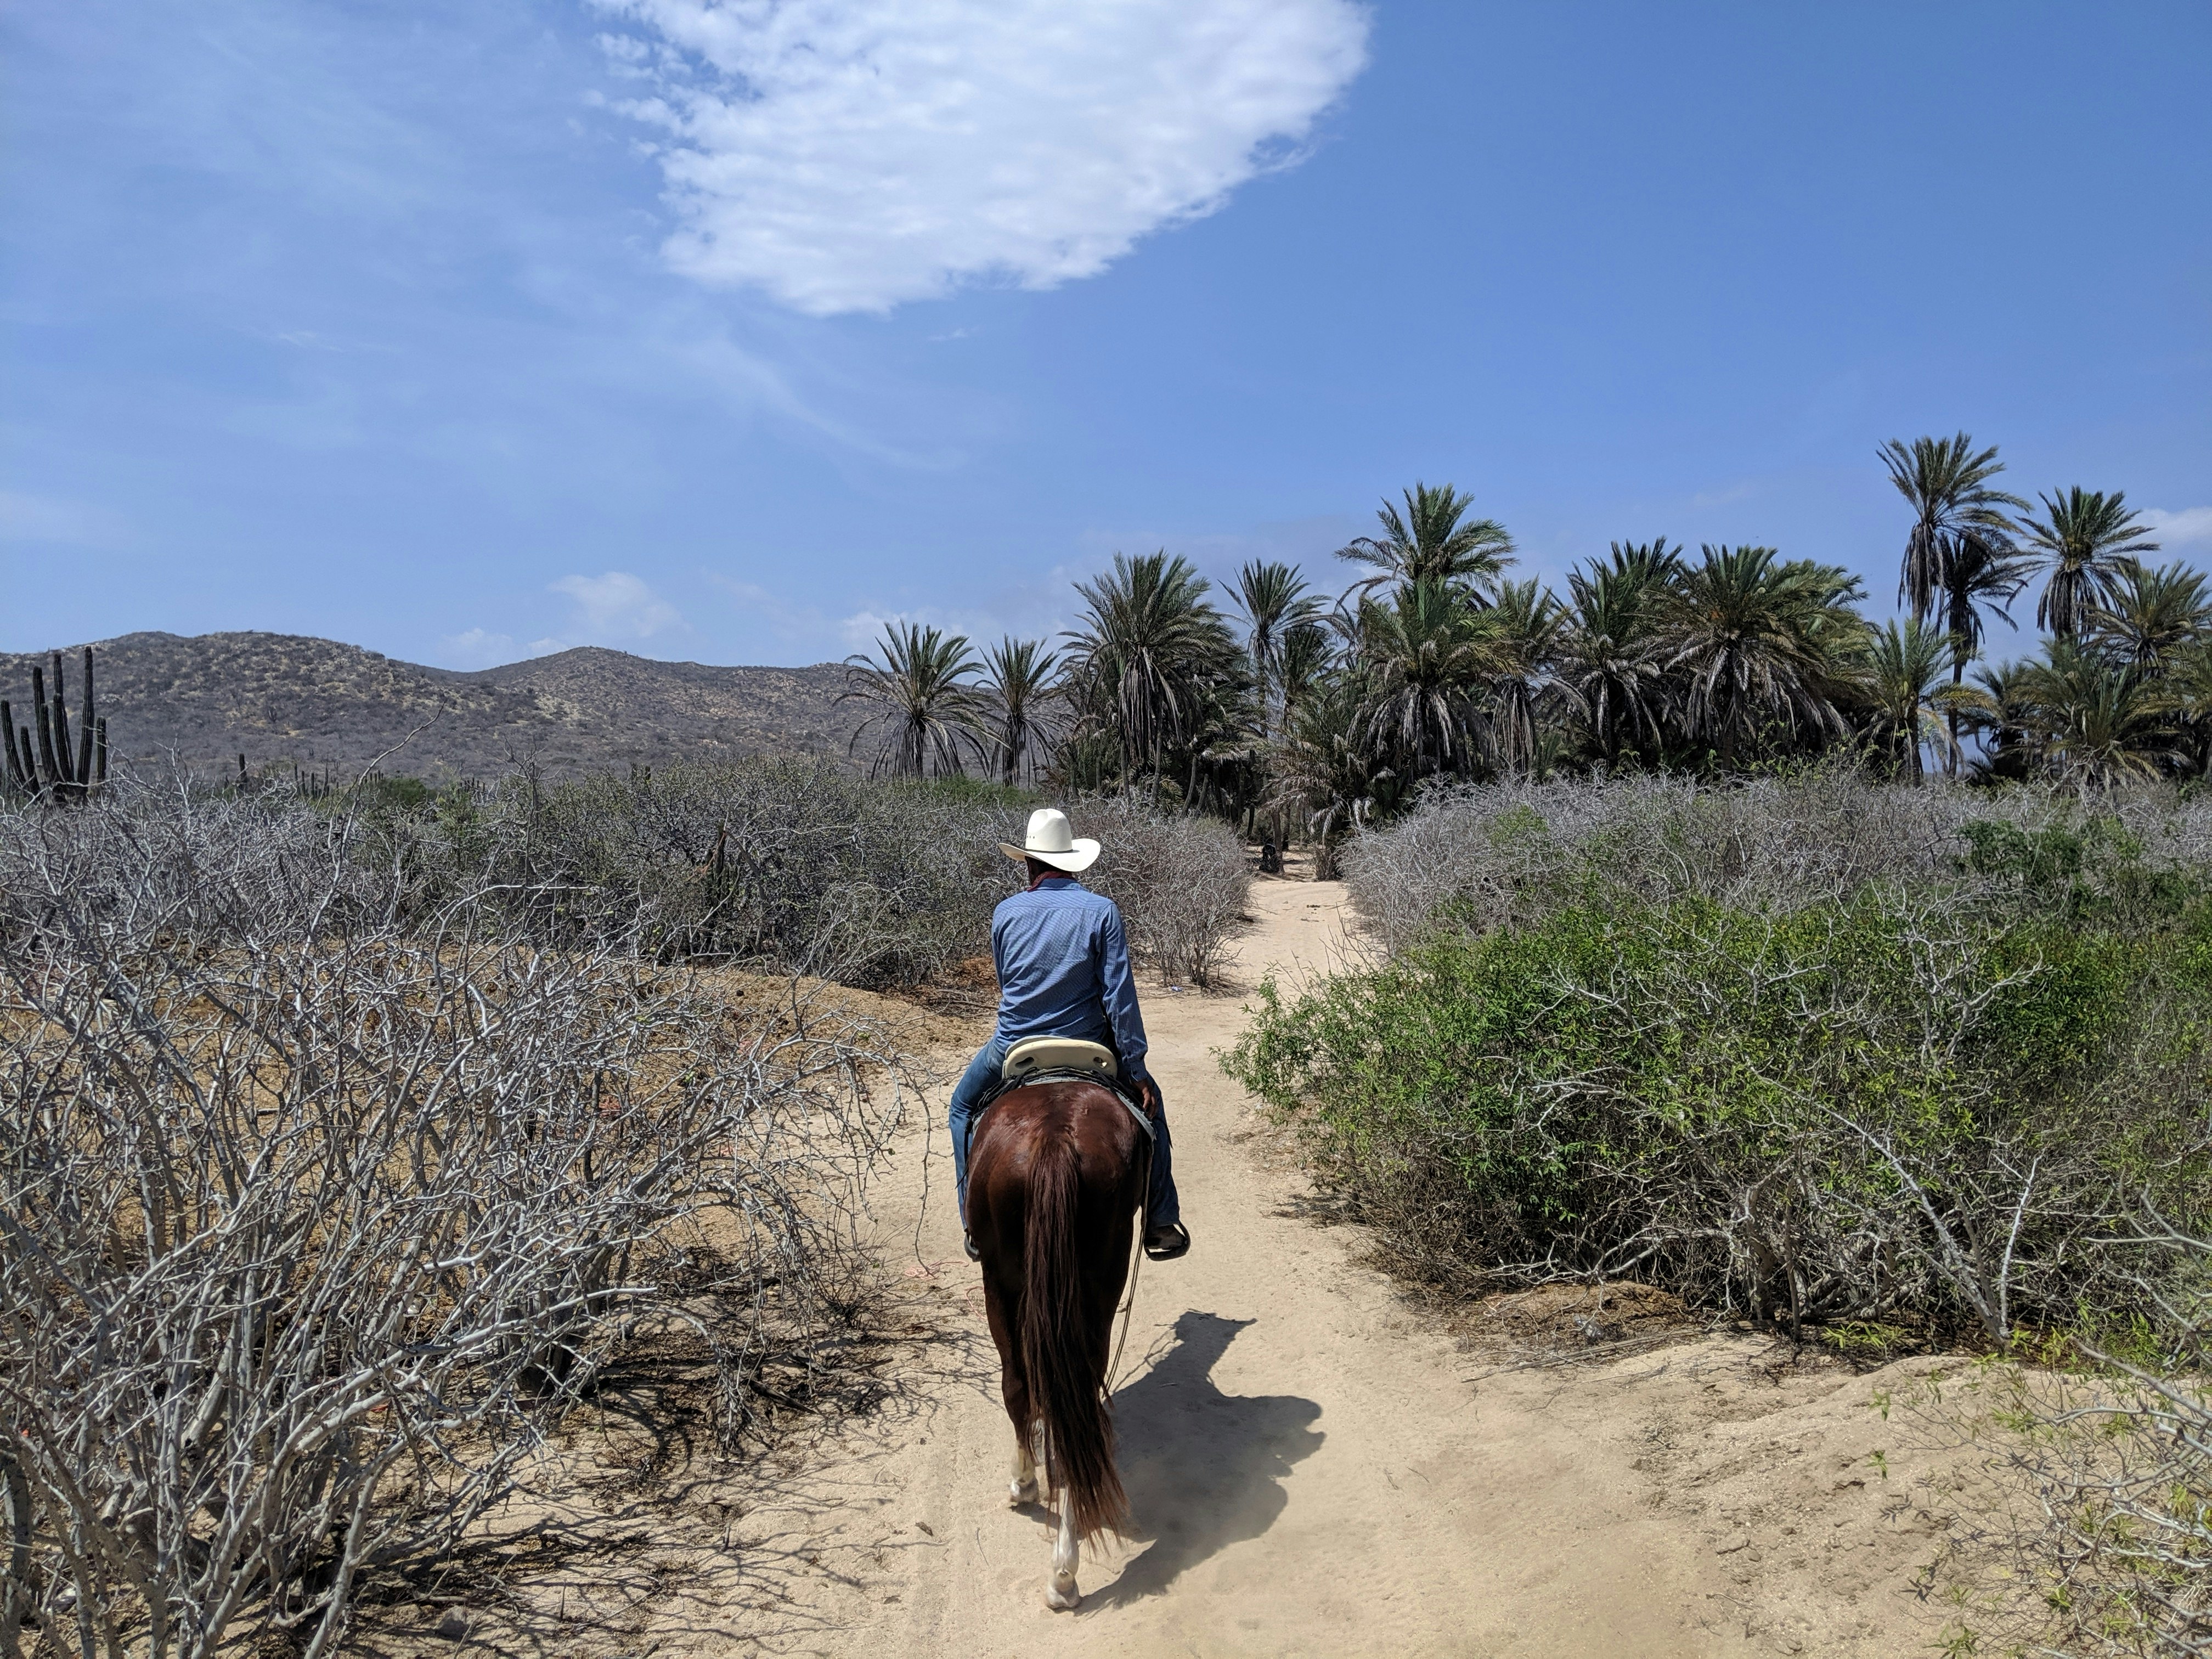 A view of the back of a man riding a horse across arid land